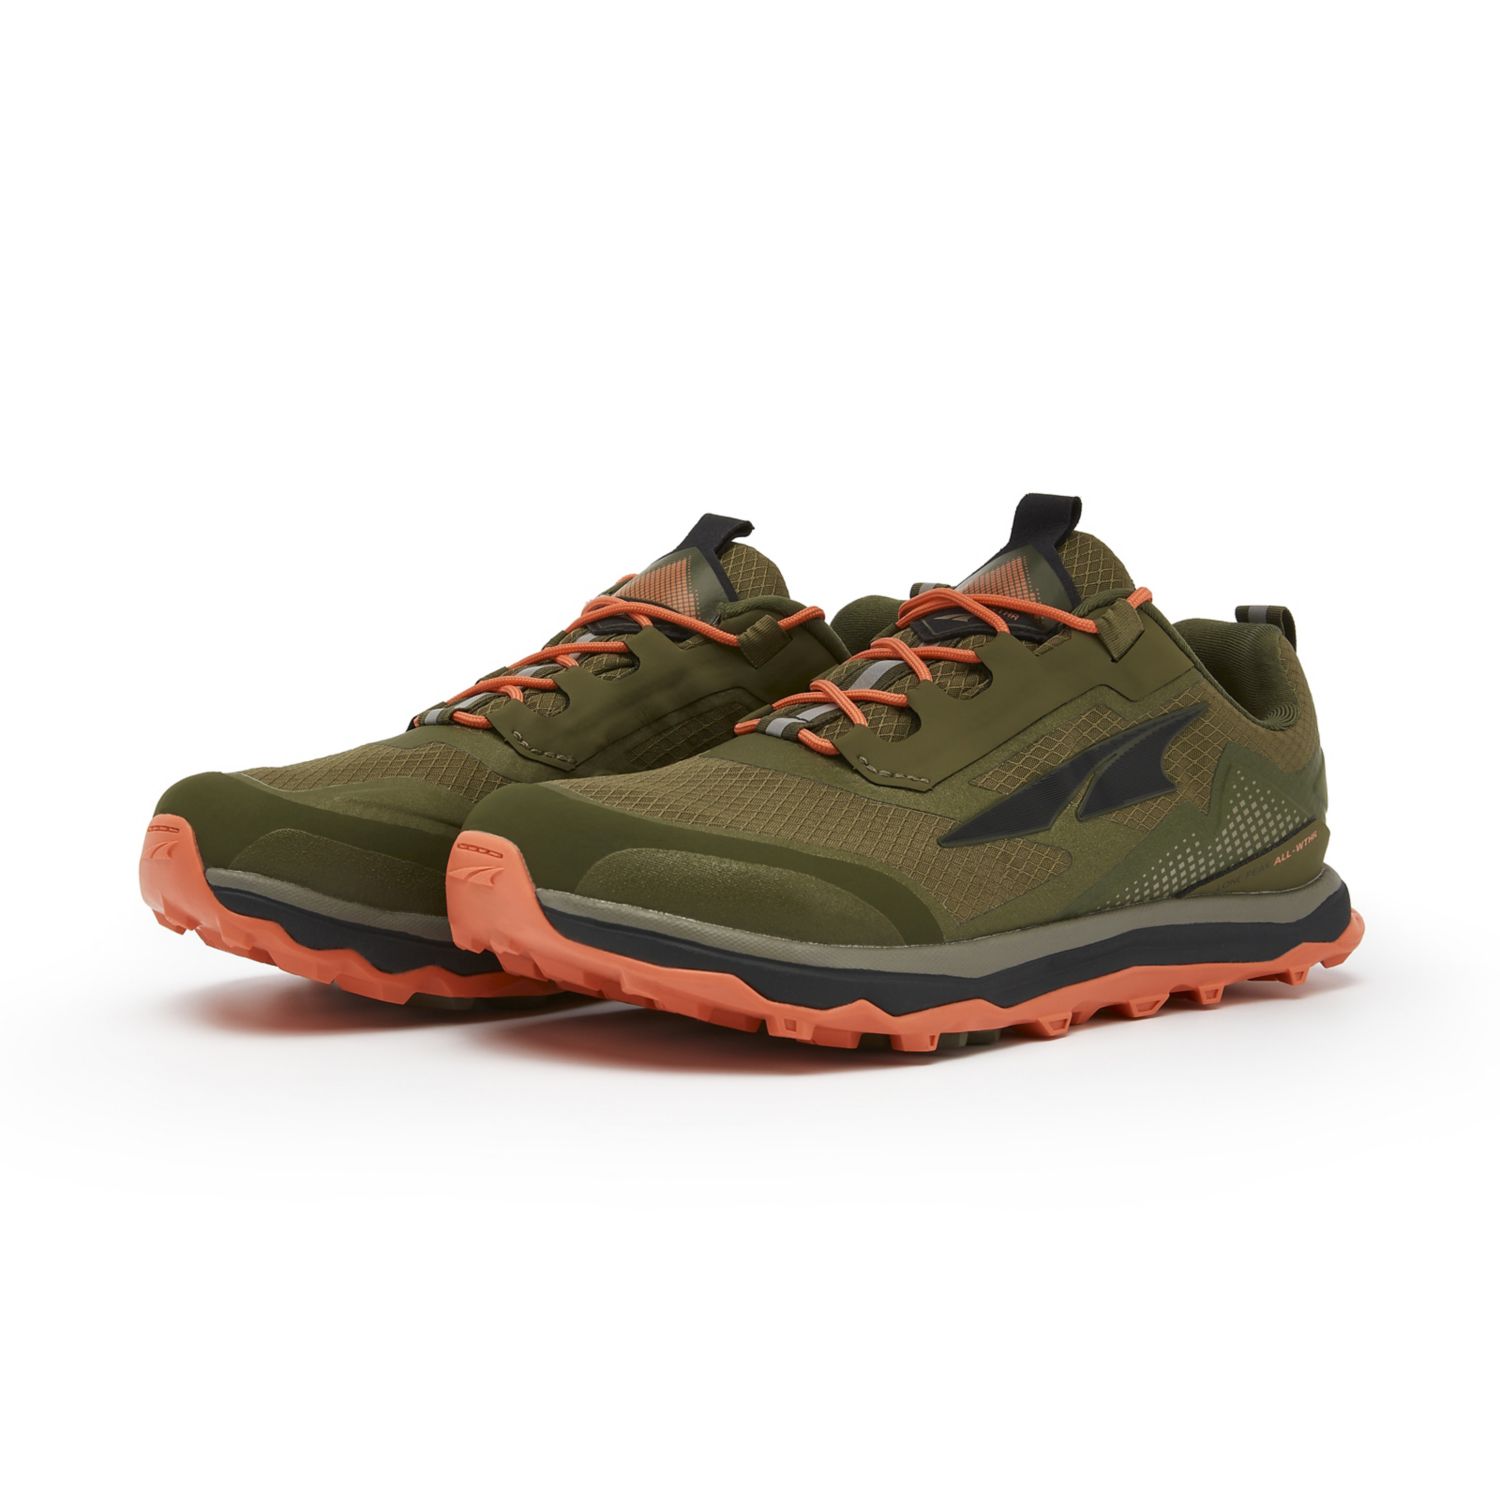 Olive Altra Lone Peak All-wthr Low Women's Trail Running Shoes | Ireland-79803129